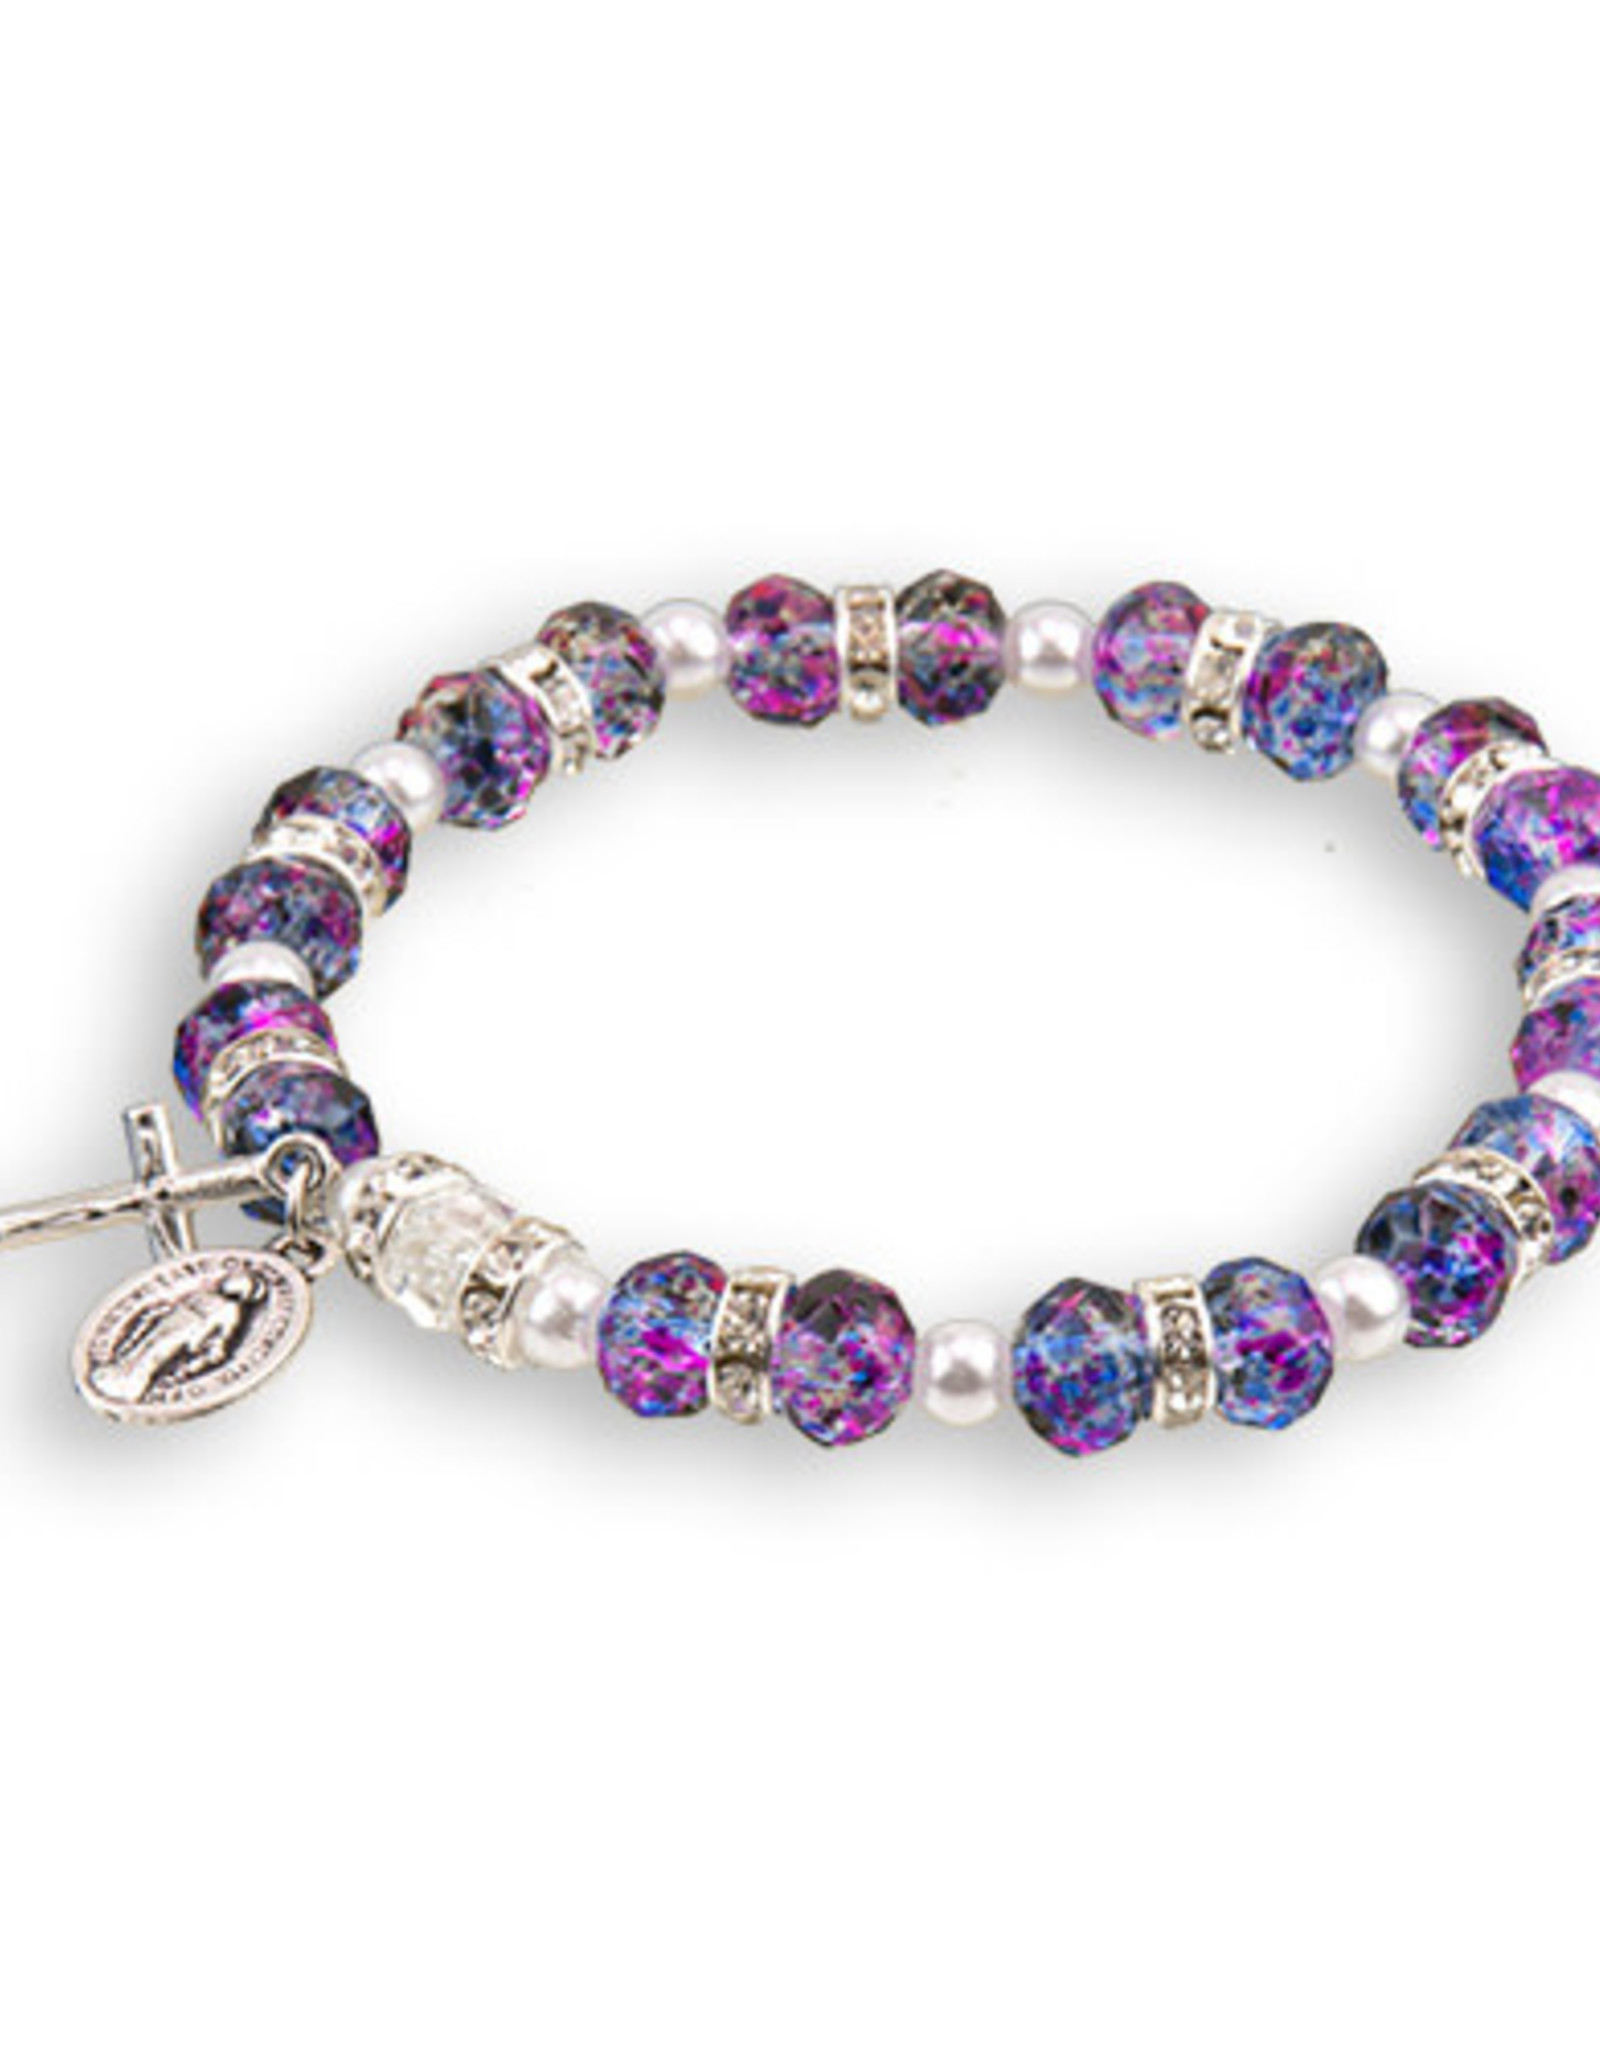 Amethyst Tin-Cut Bracelet with Silver Miraculous Charm